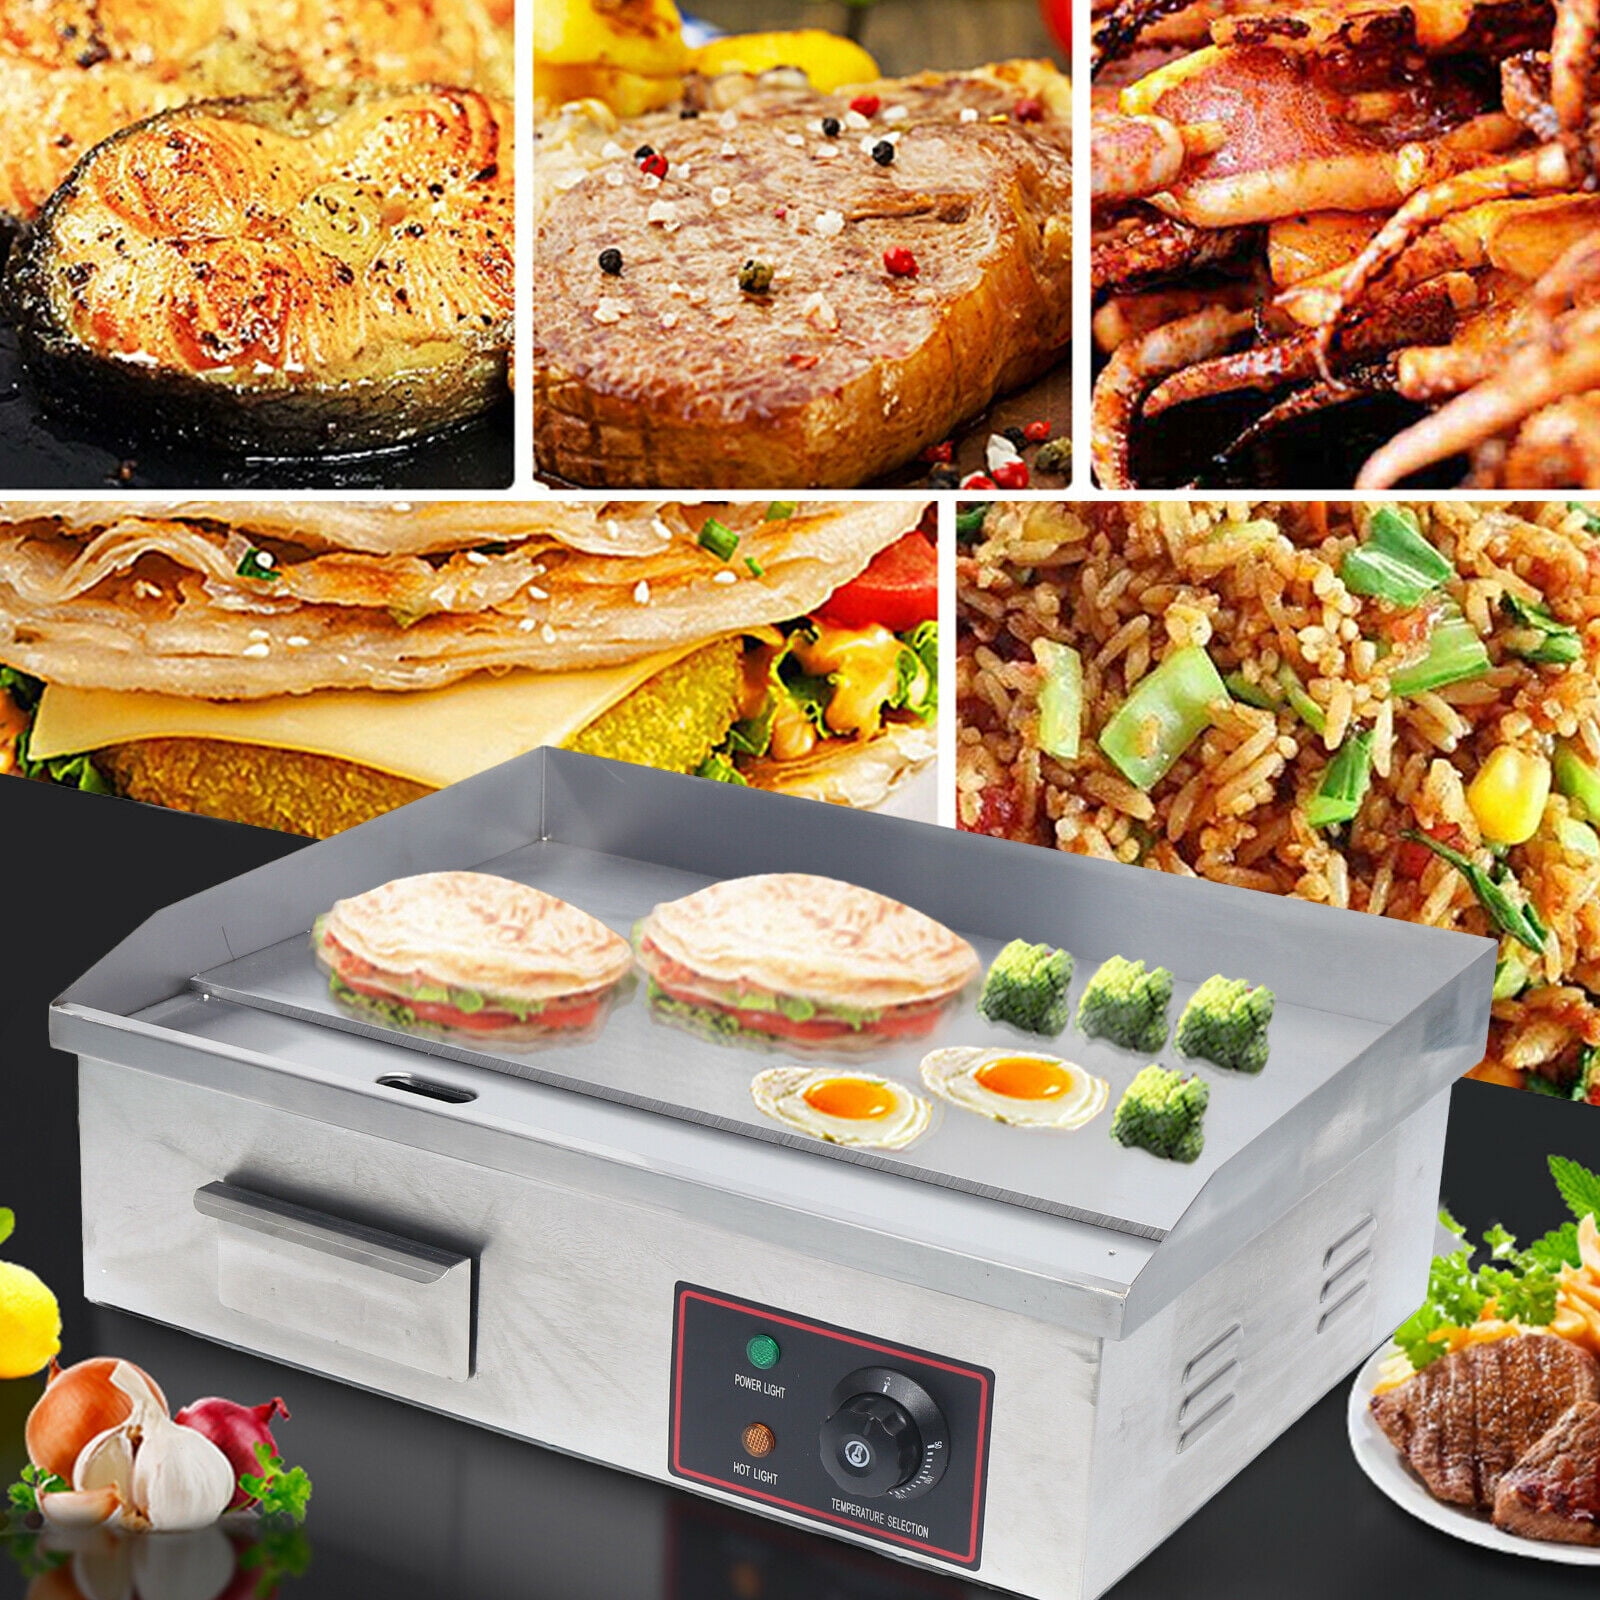 TBVECHI Teppanyaki, Electric Griddle Cooktop Countertop Commercial Flat Top  Grill Griddles BBQ Plate Grill Thermostatic Control